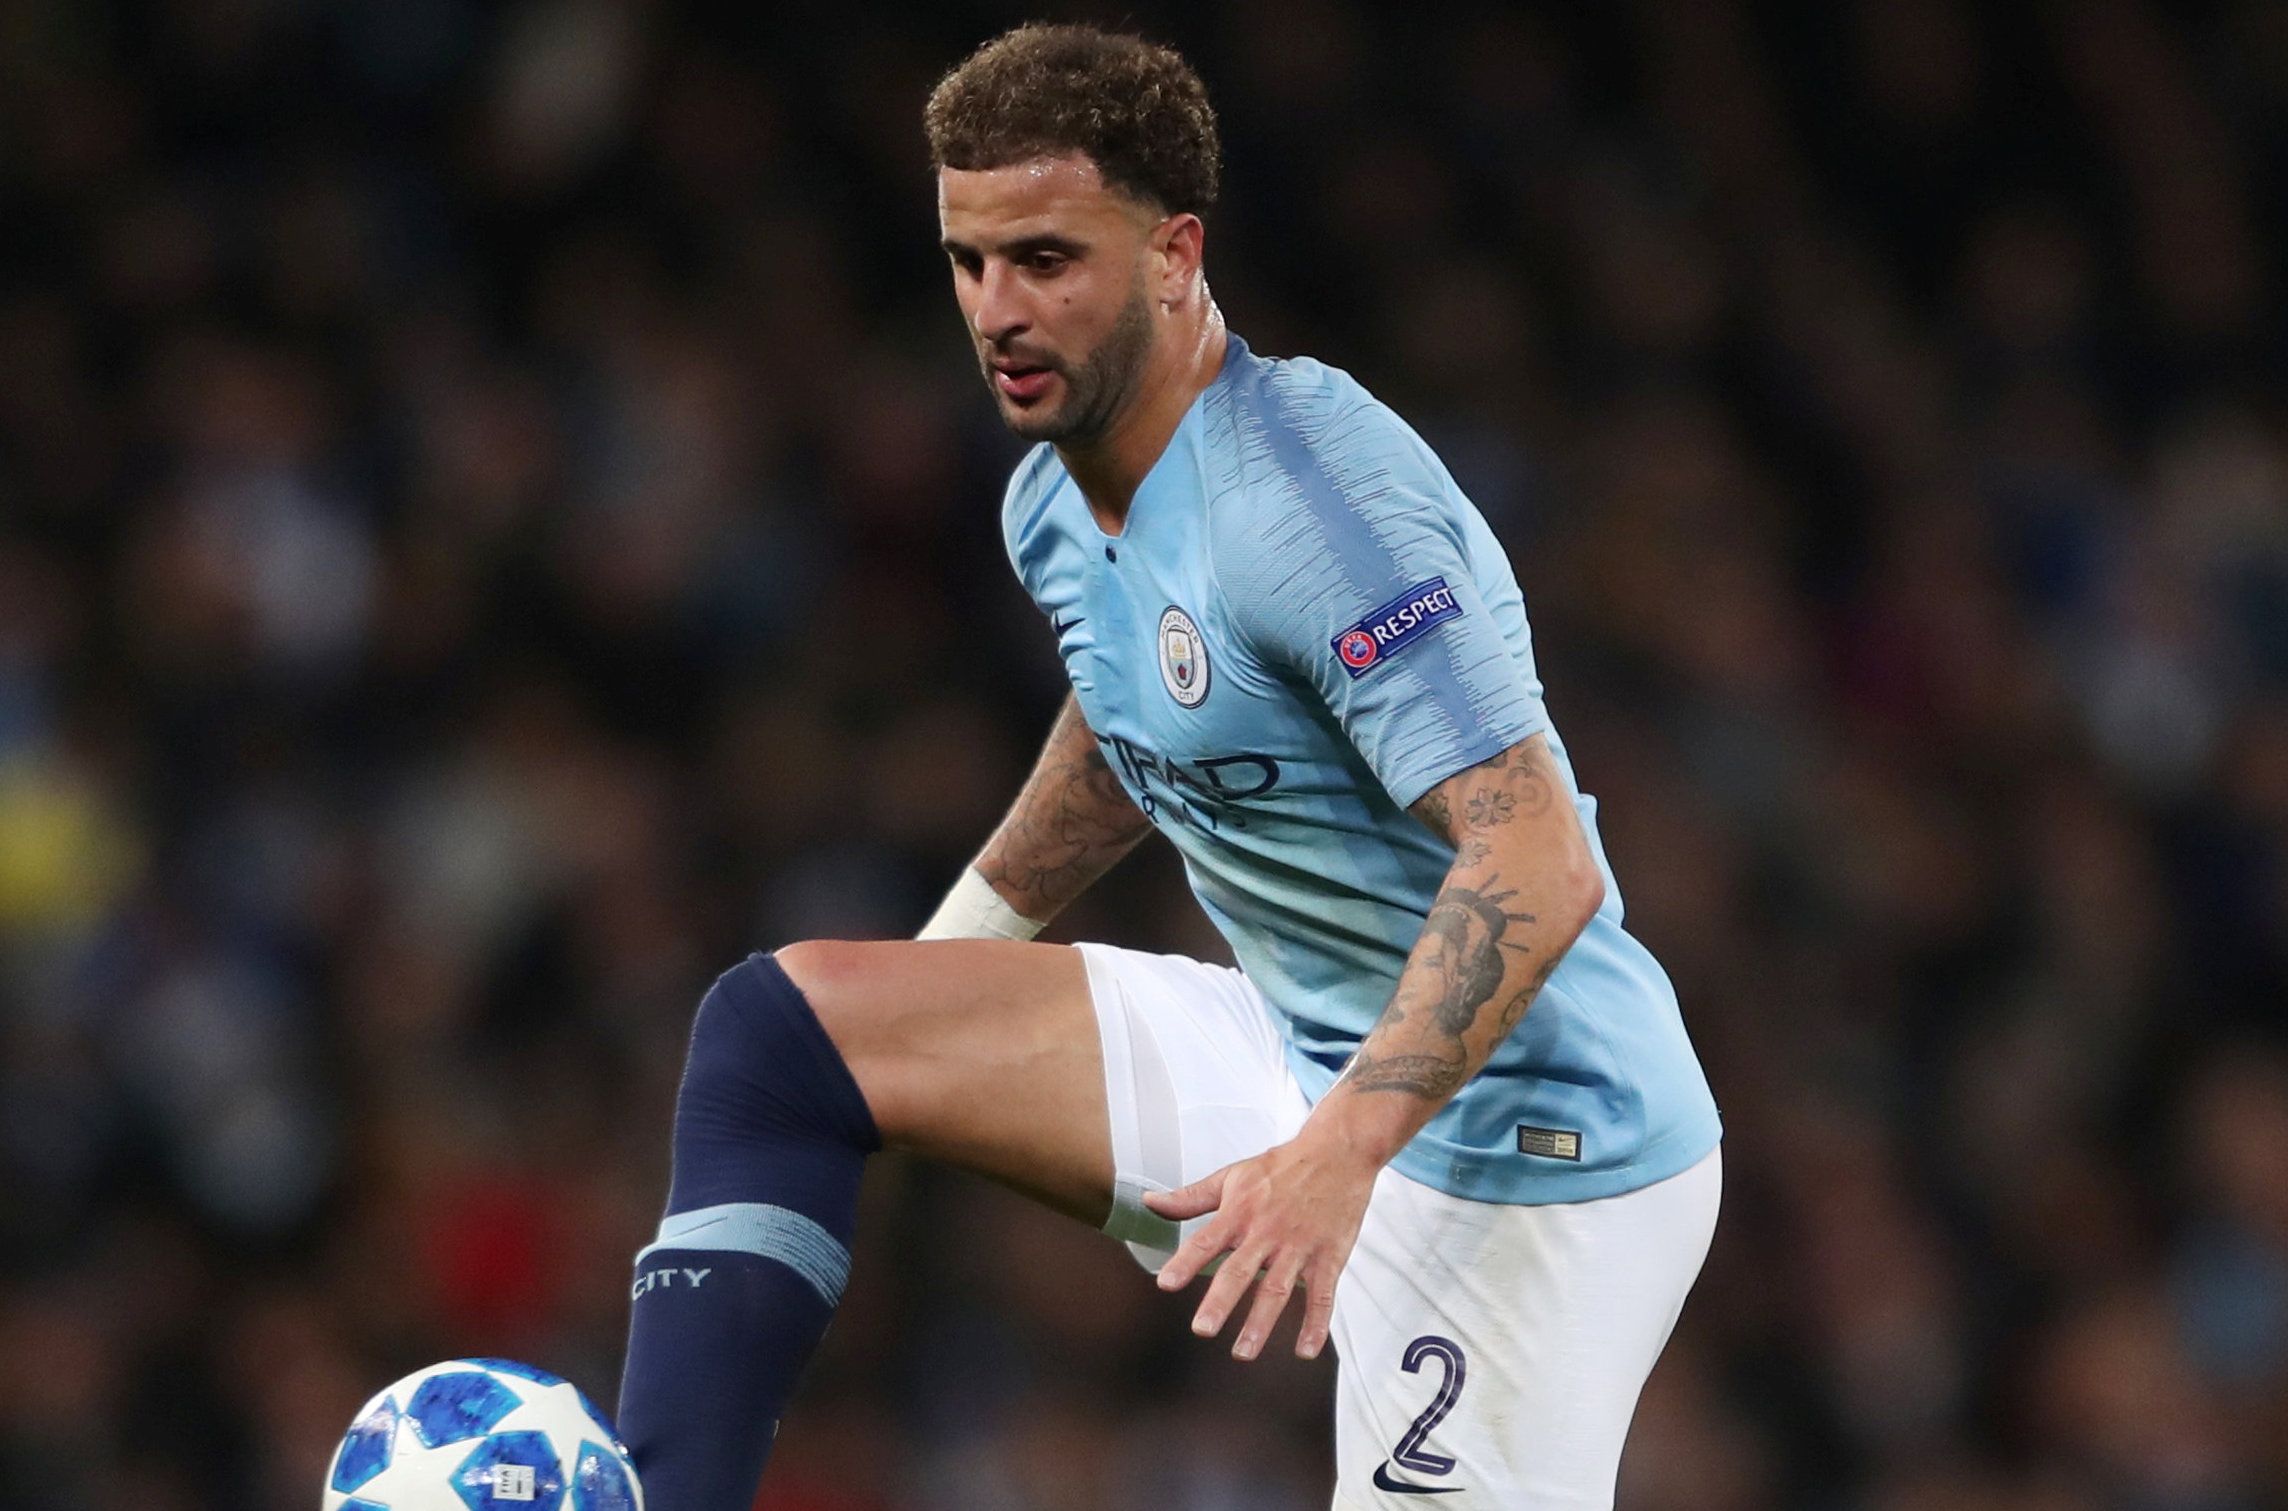 Soccer Football - Champions League - Group Stage - Group F - Manchester City v Shakhtar Donetsk - Etihad Stadium, Manchester, Britain - November 7, 2018  Manchester City's Kyle Walker in action   Action Images via Reuters/Lee Smith